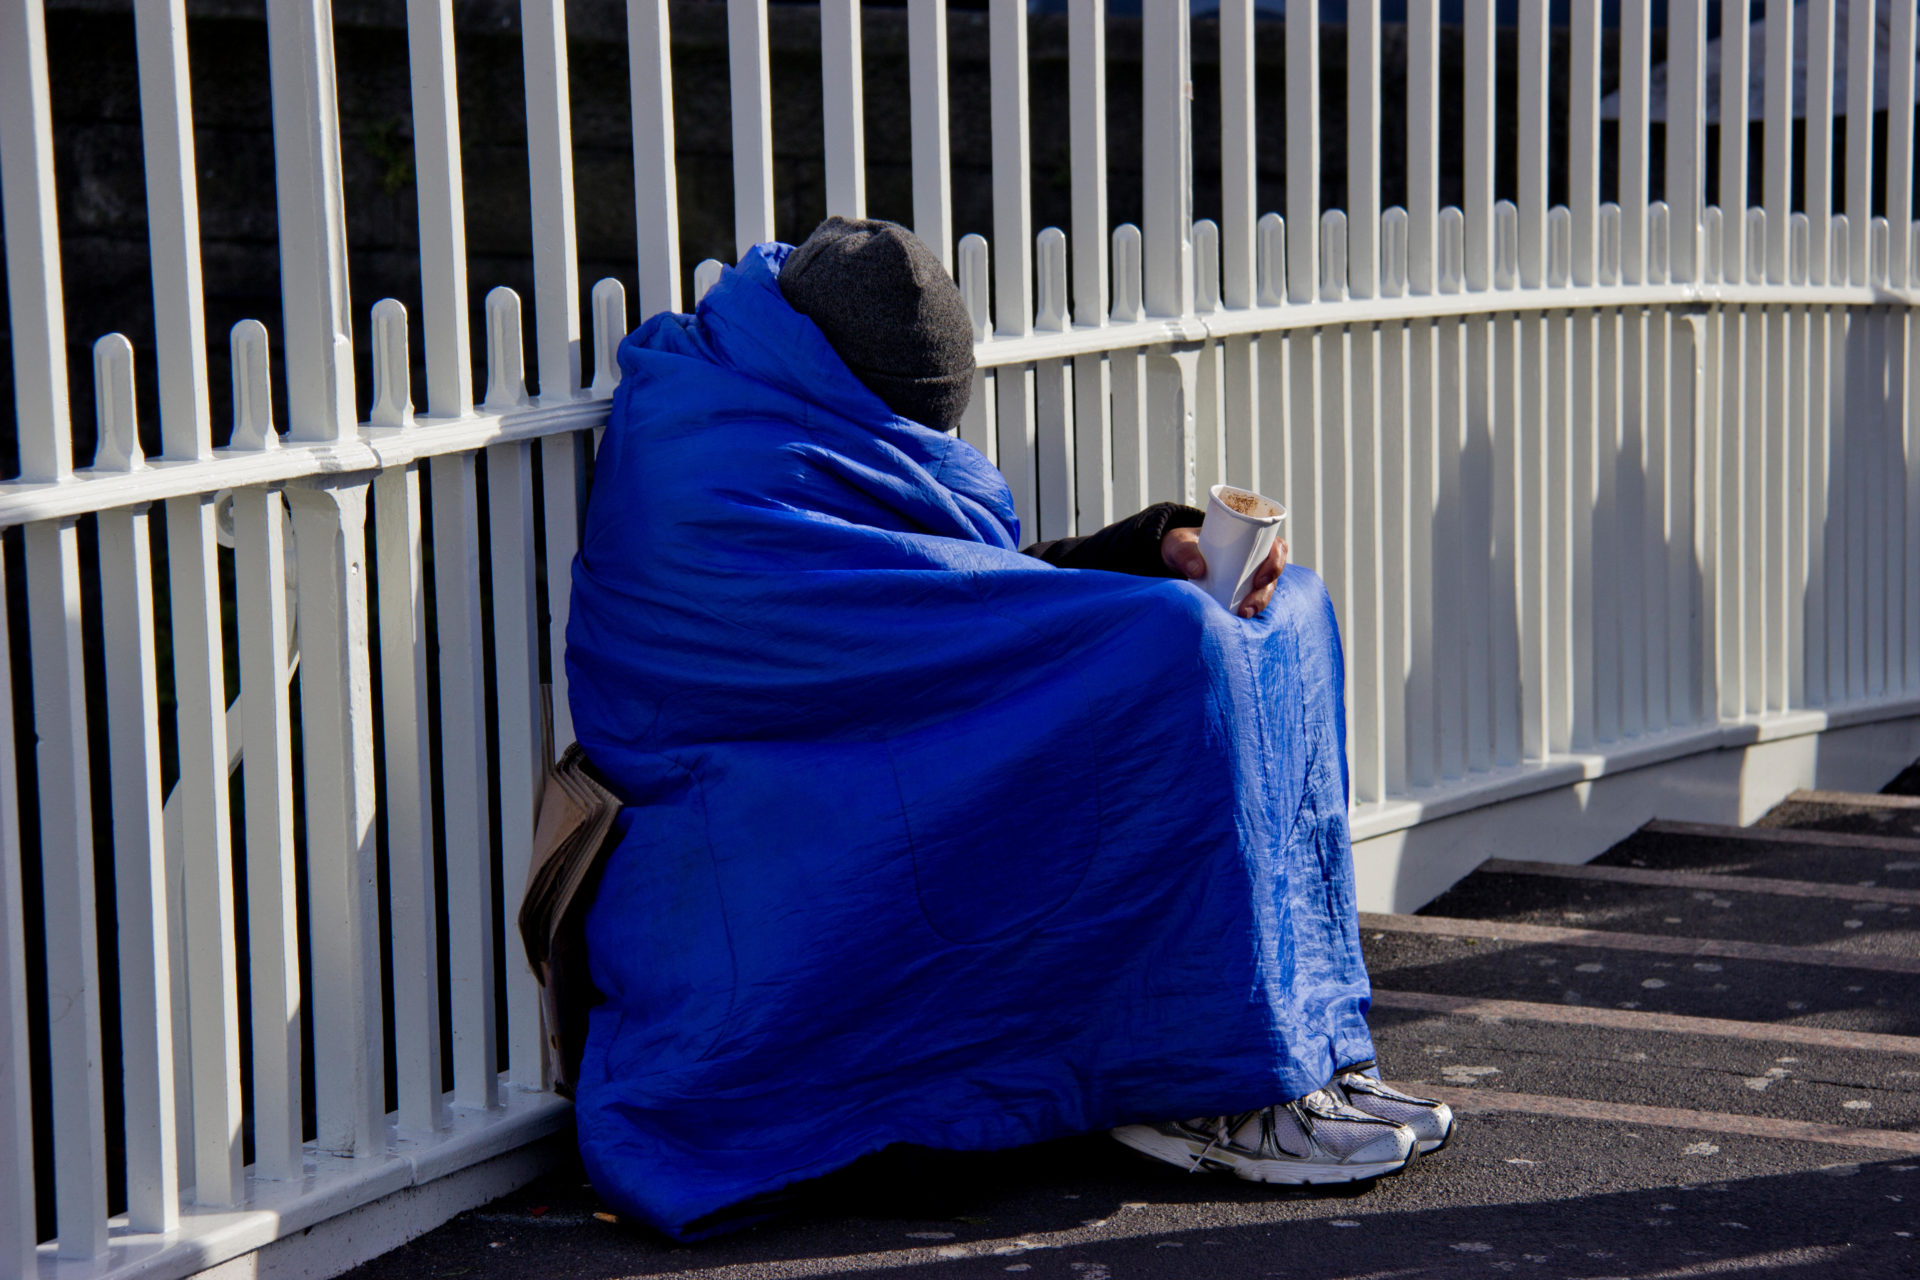 Homeless person shelters from the cold Ha’penny Bridge in Dublin. Image: Michael Rooney / Alamy